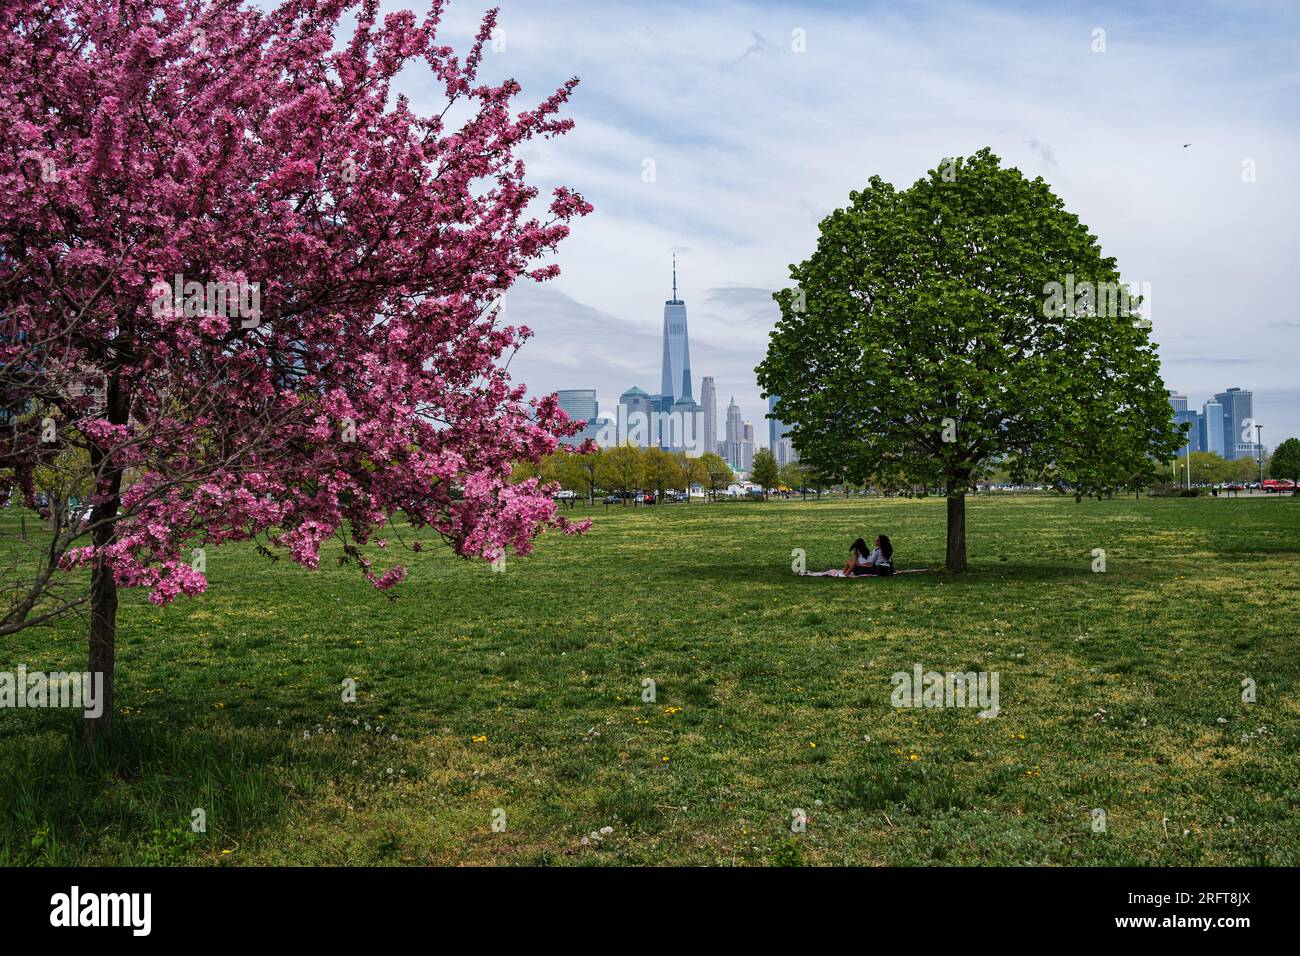 Blossoming tranquility at Liberty State Park, Jersey City. Picnic beneath cherry blossoms, Manhattan's skyline afar. Nature and urban grace unite. Stock Photo